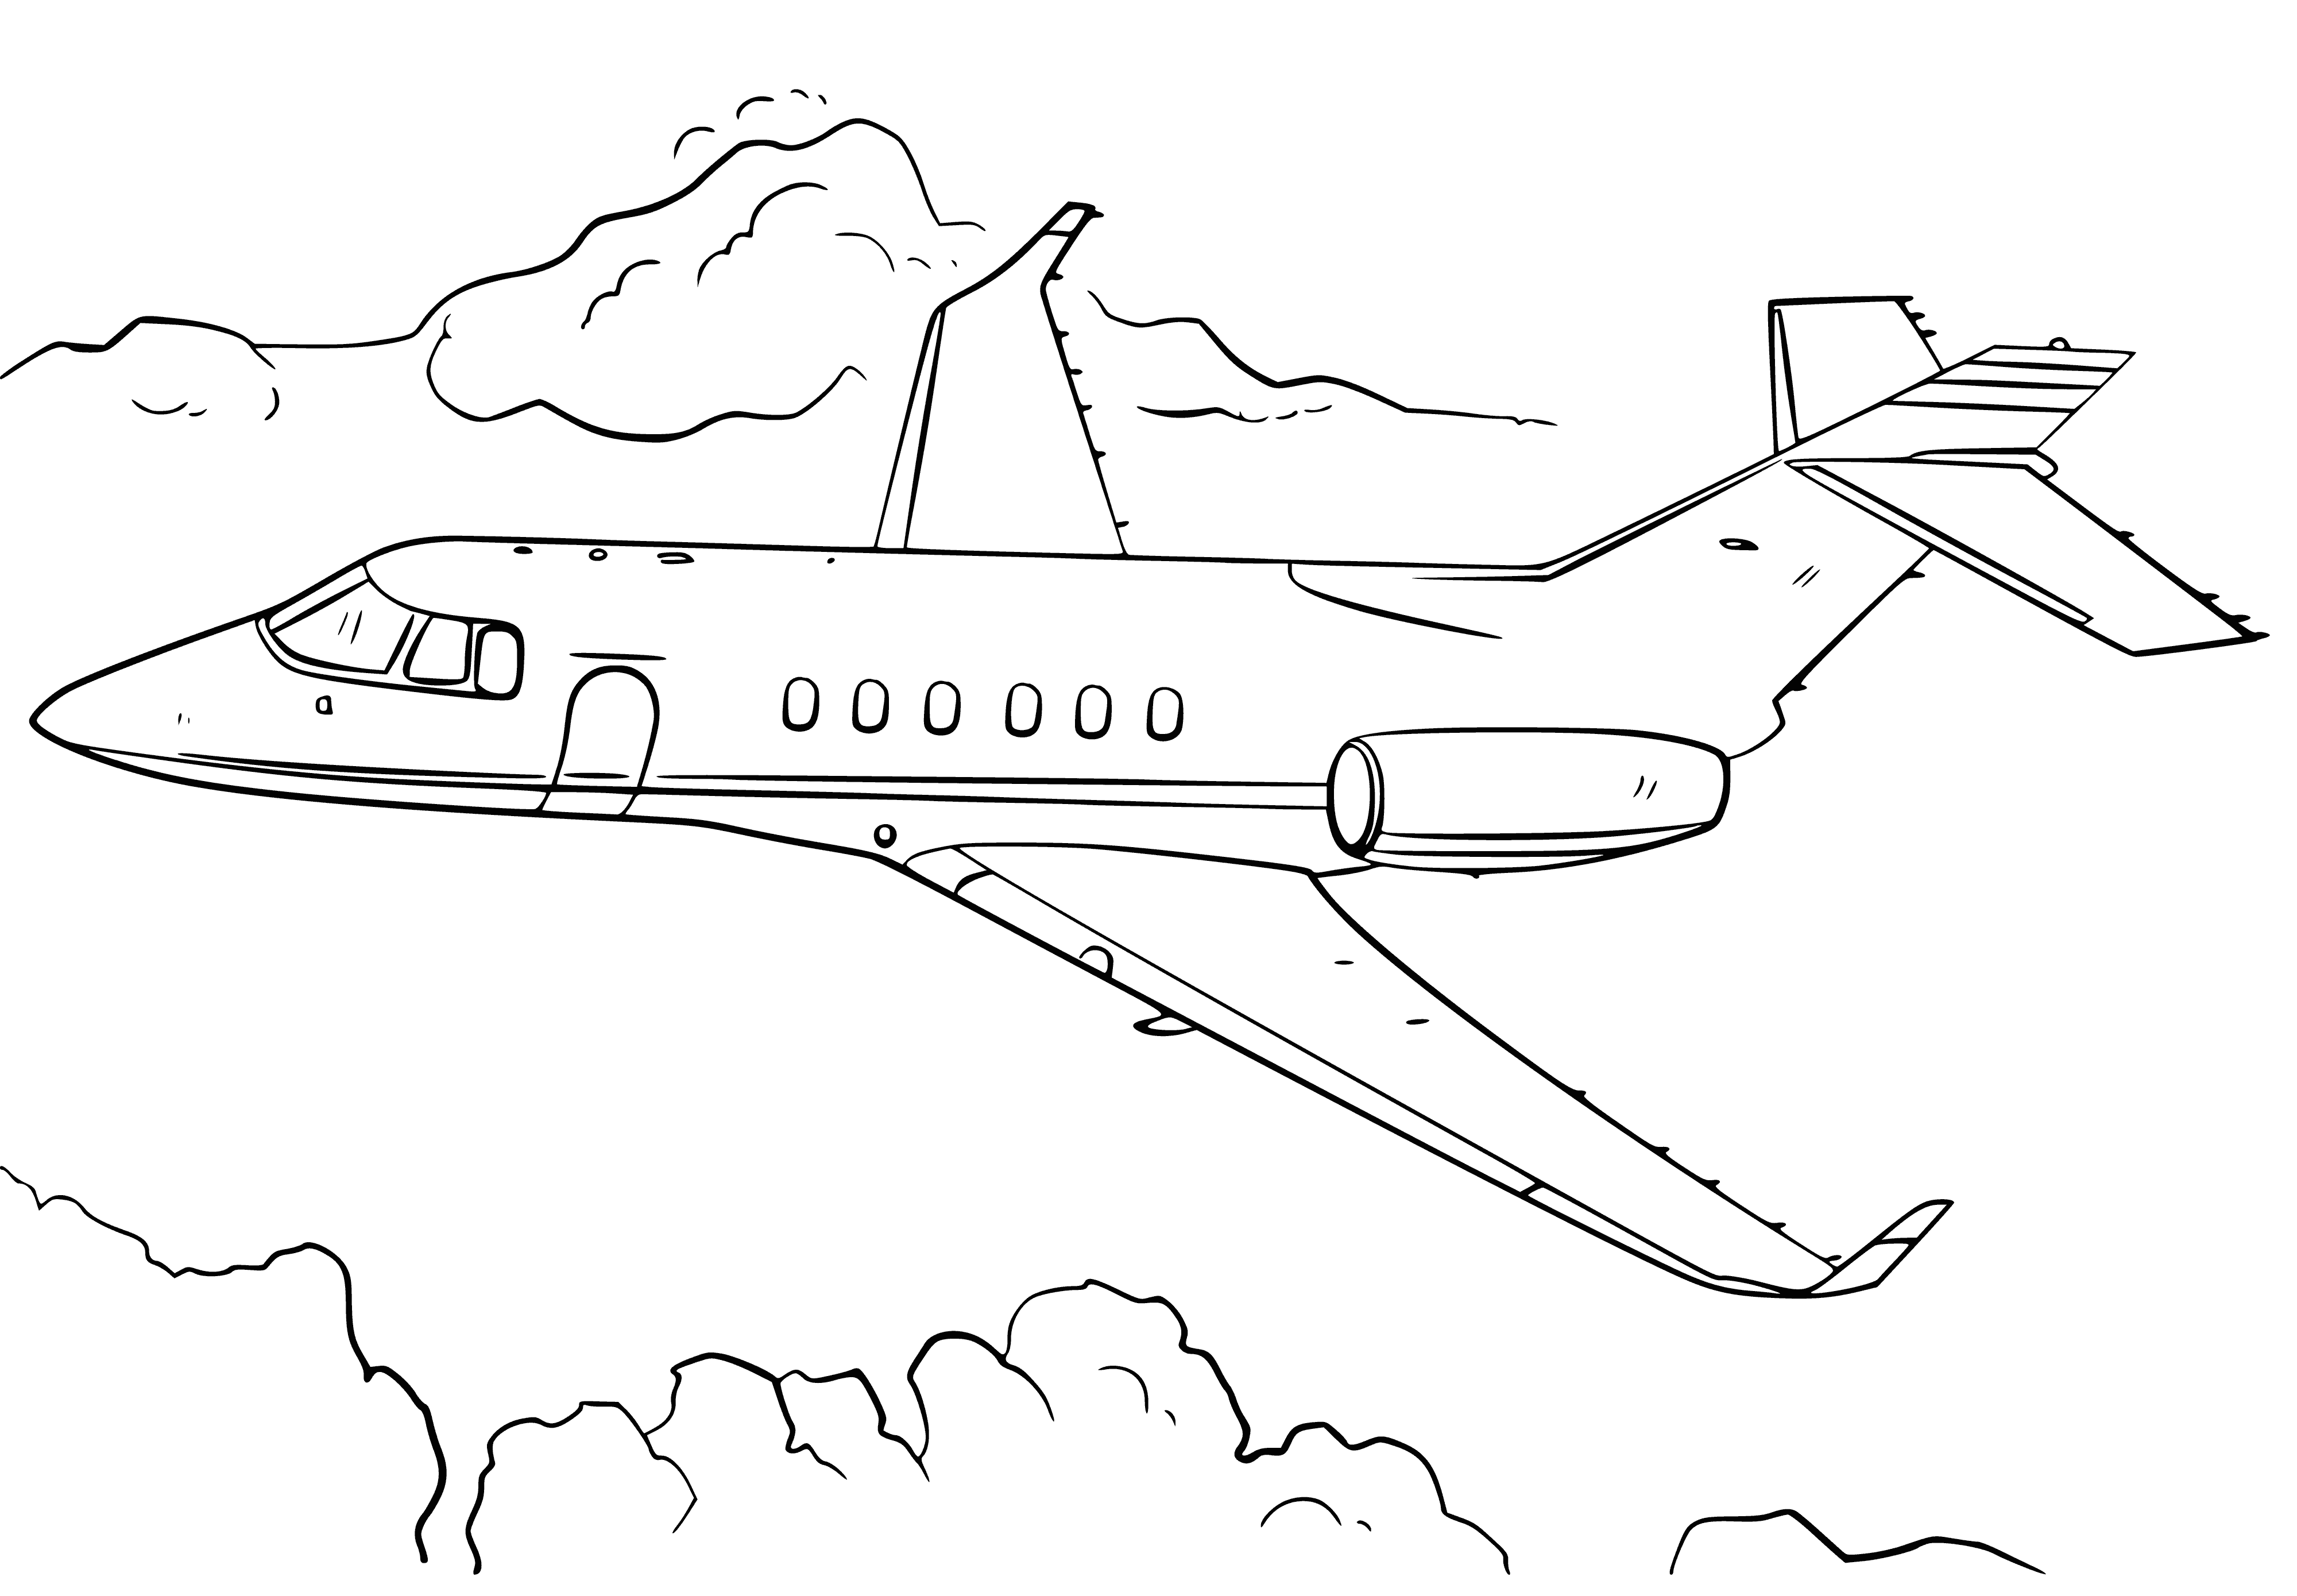 coloring page: Jet plane with silver sheen soars through sky, sun shining brightly off surface, leaving white smoke trail.